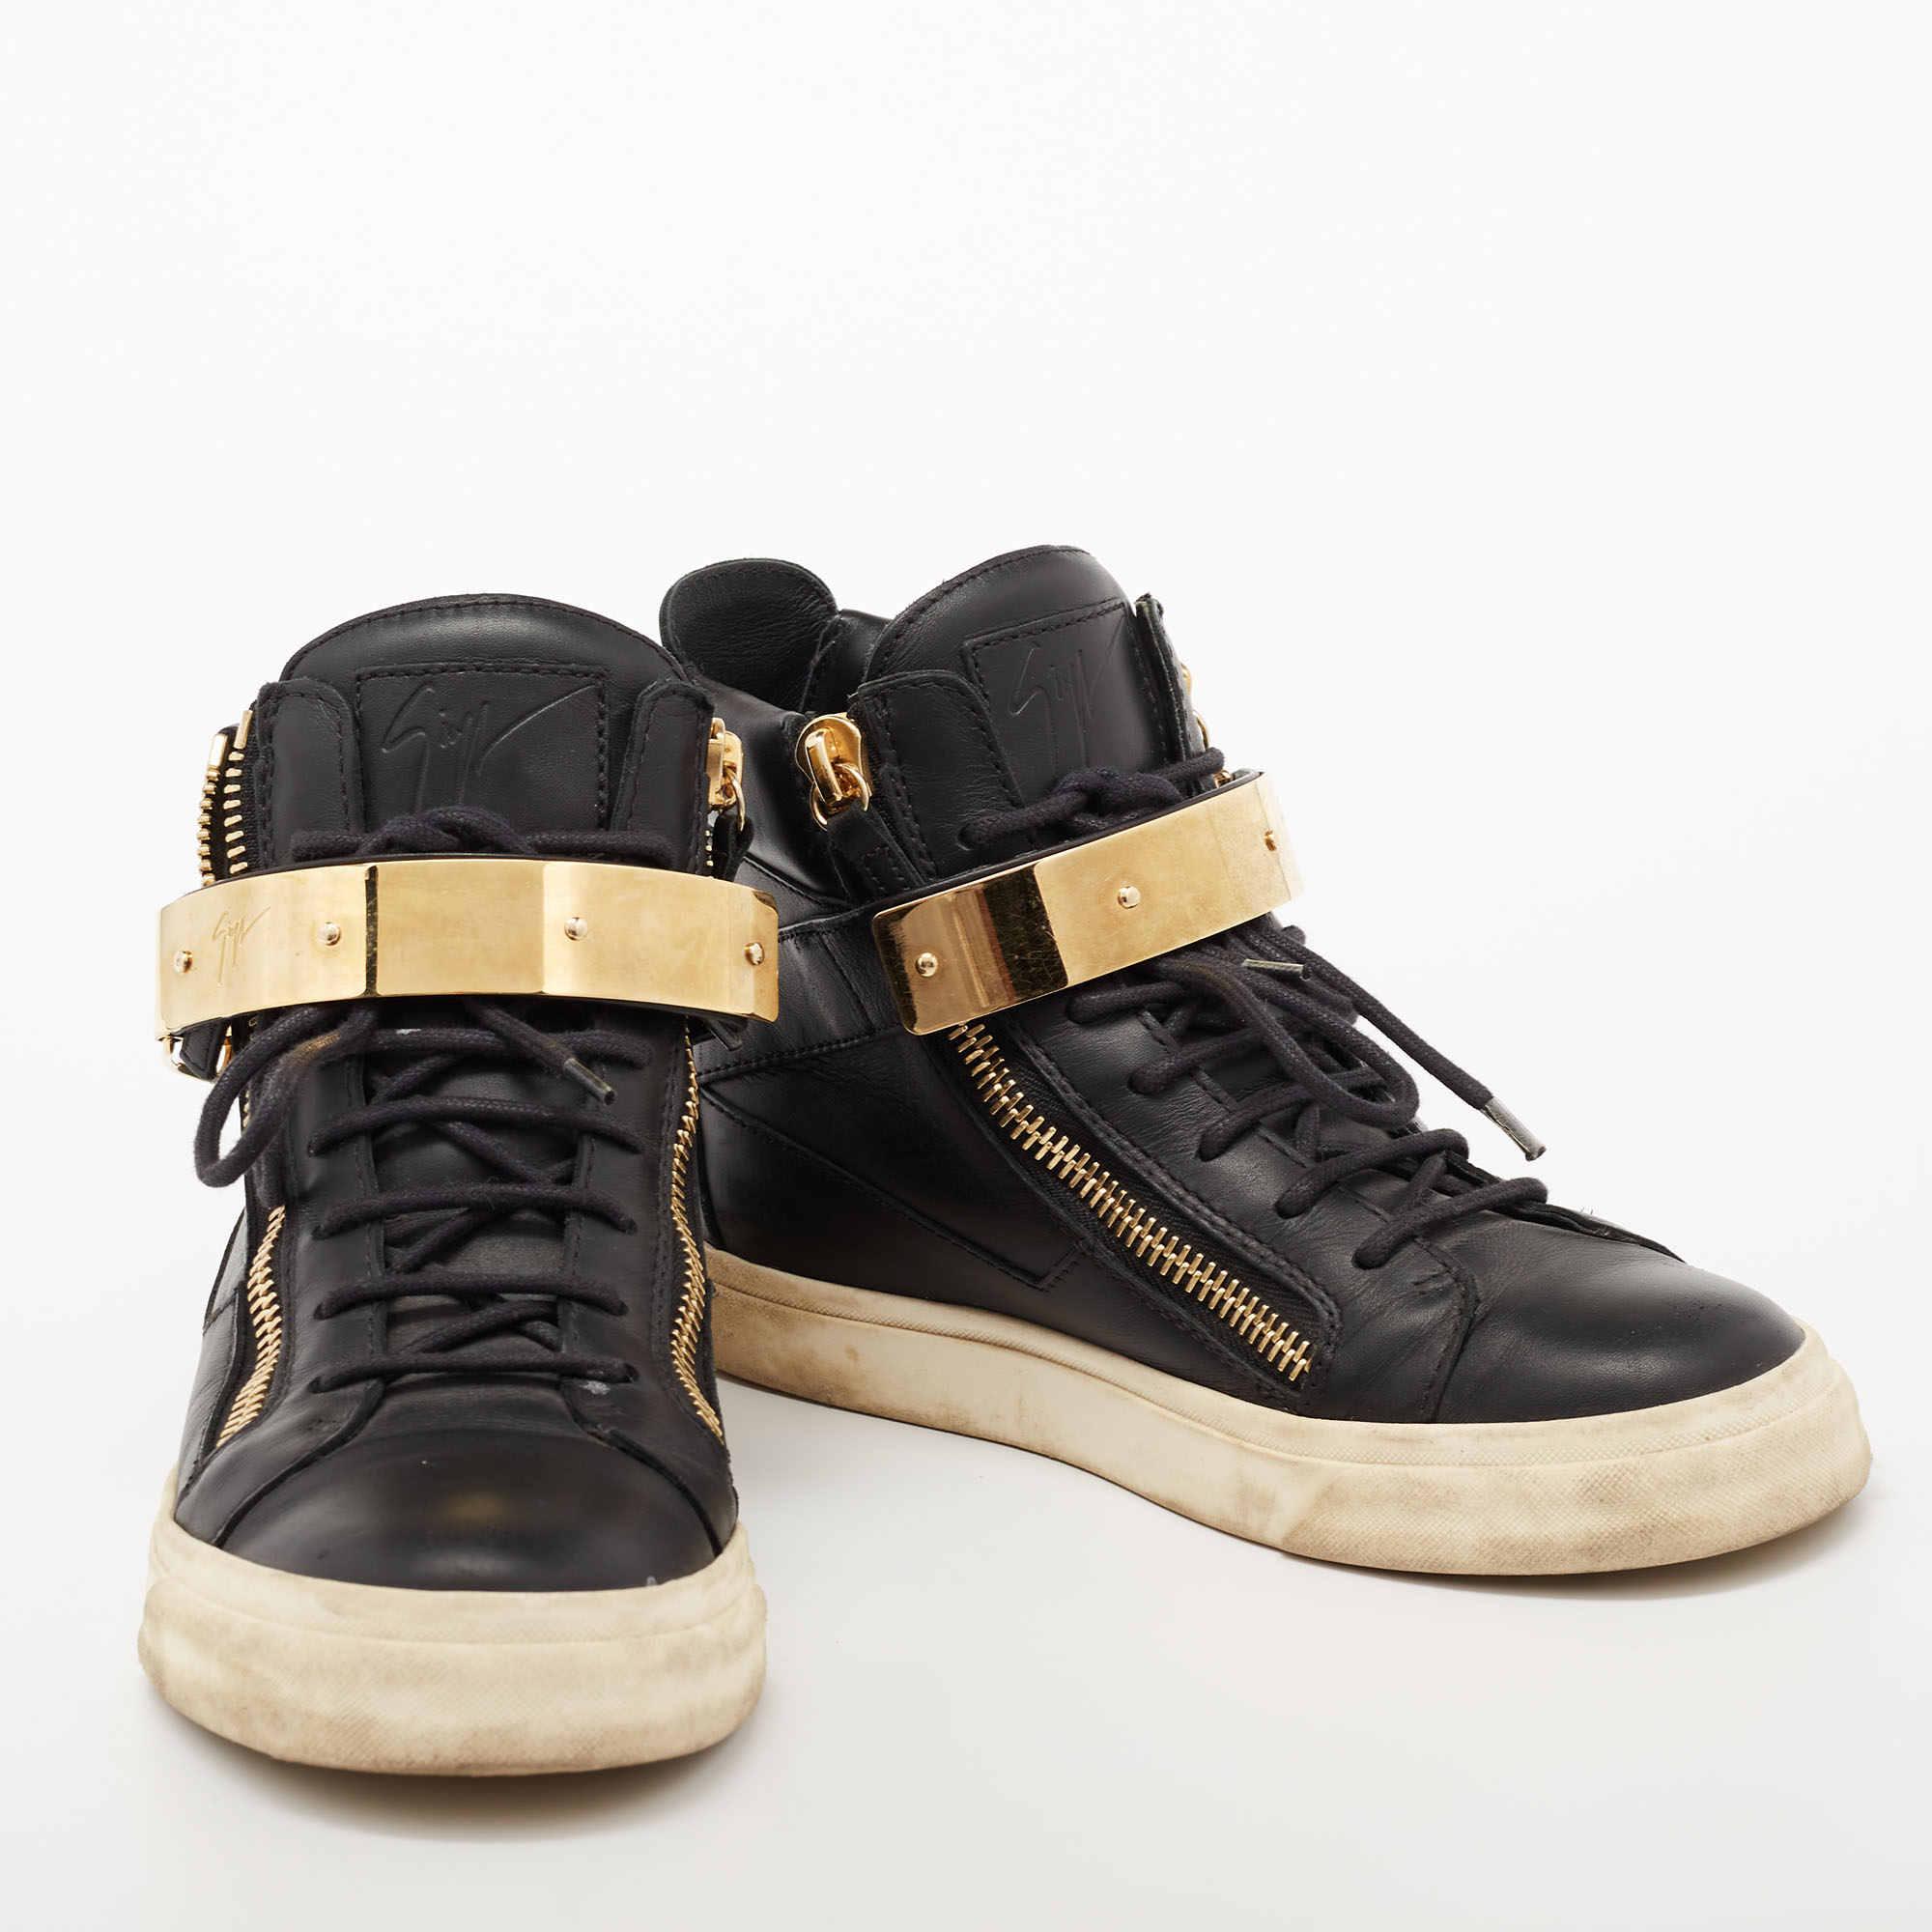 Giuseppe Zanotti Black/Gold  Leather Coby High Top Sneakers Size 37